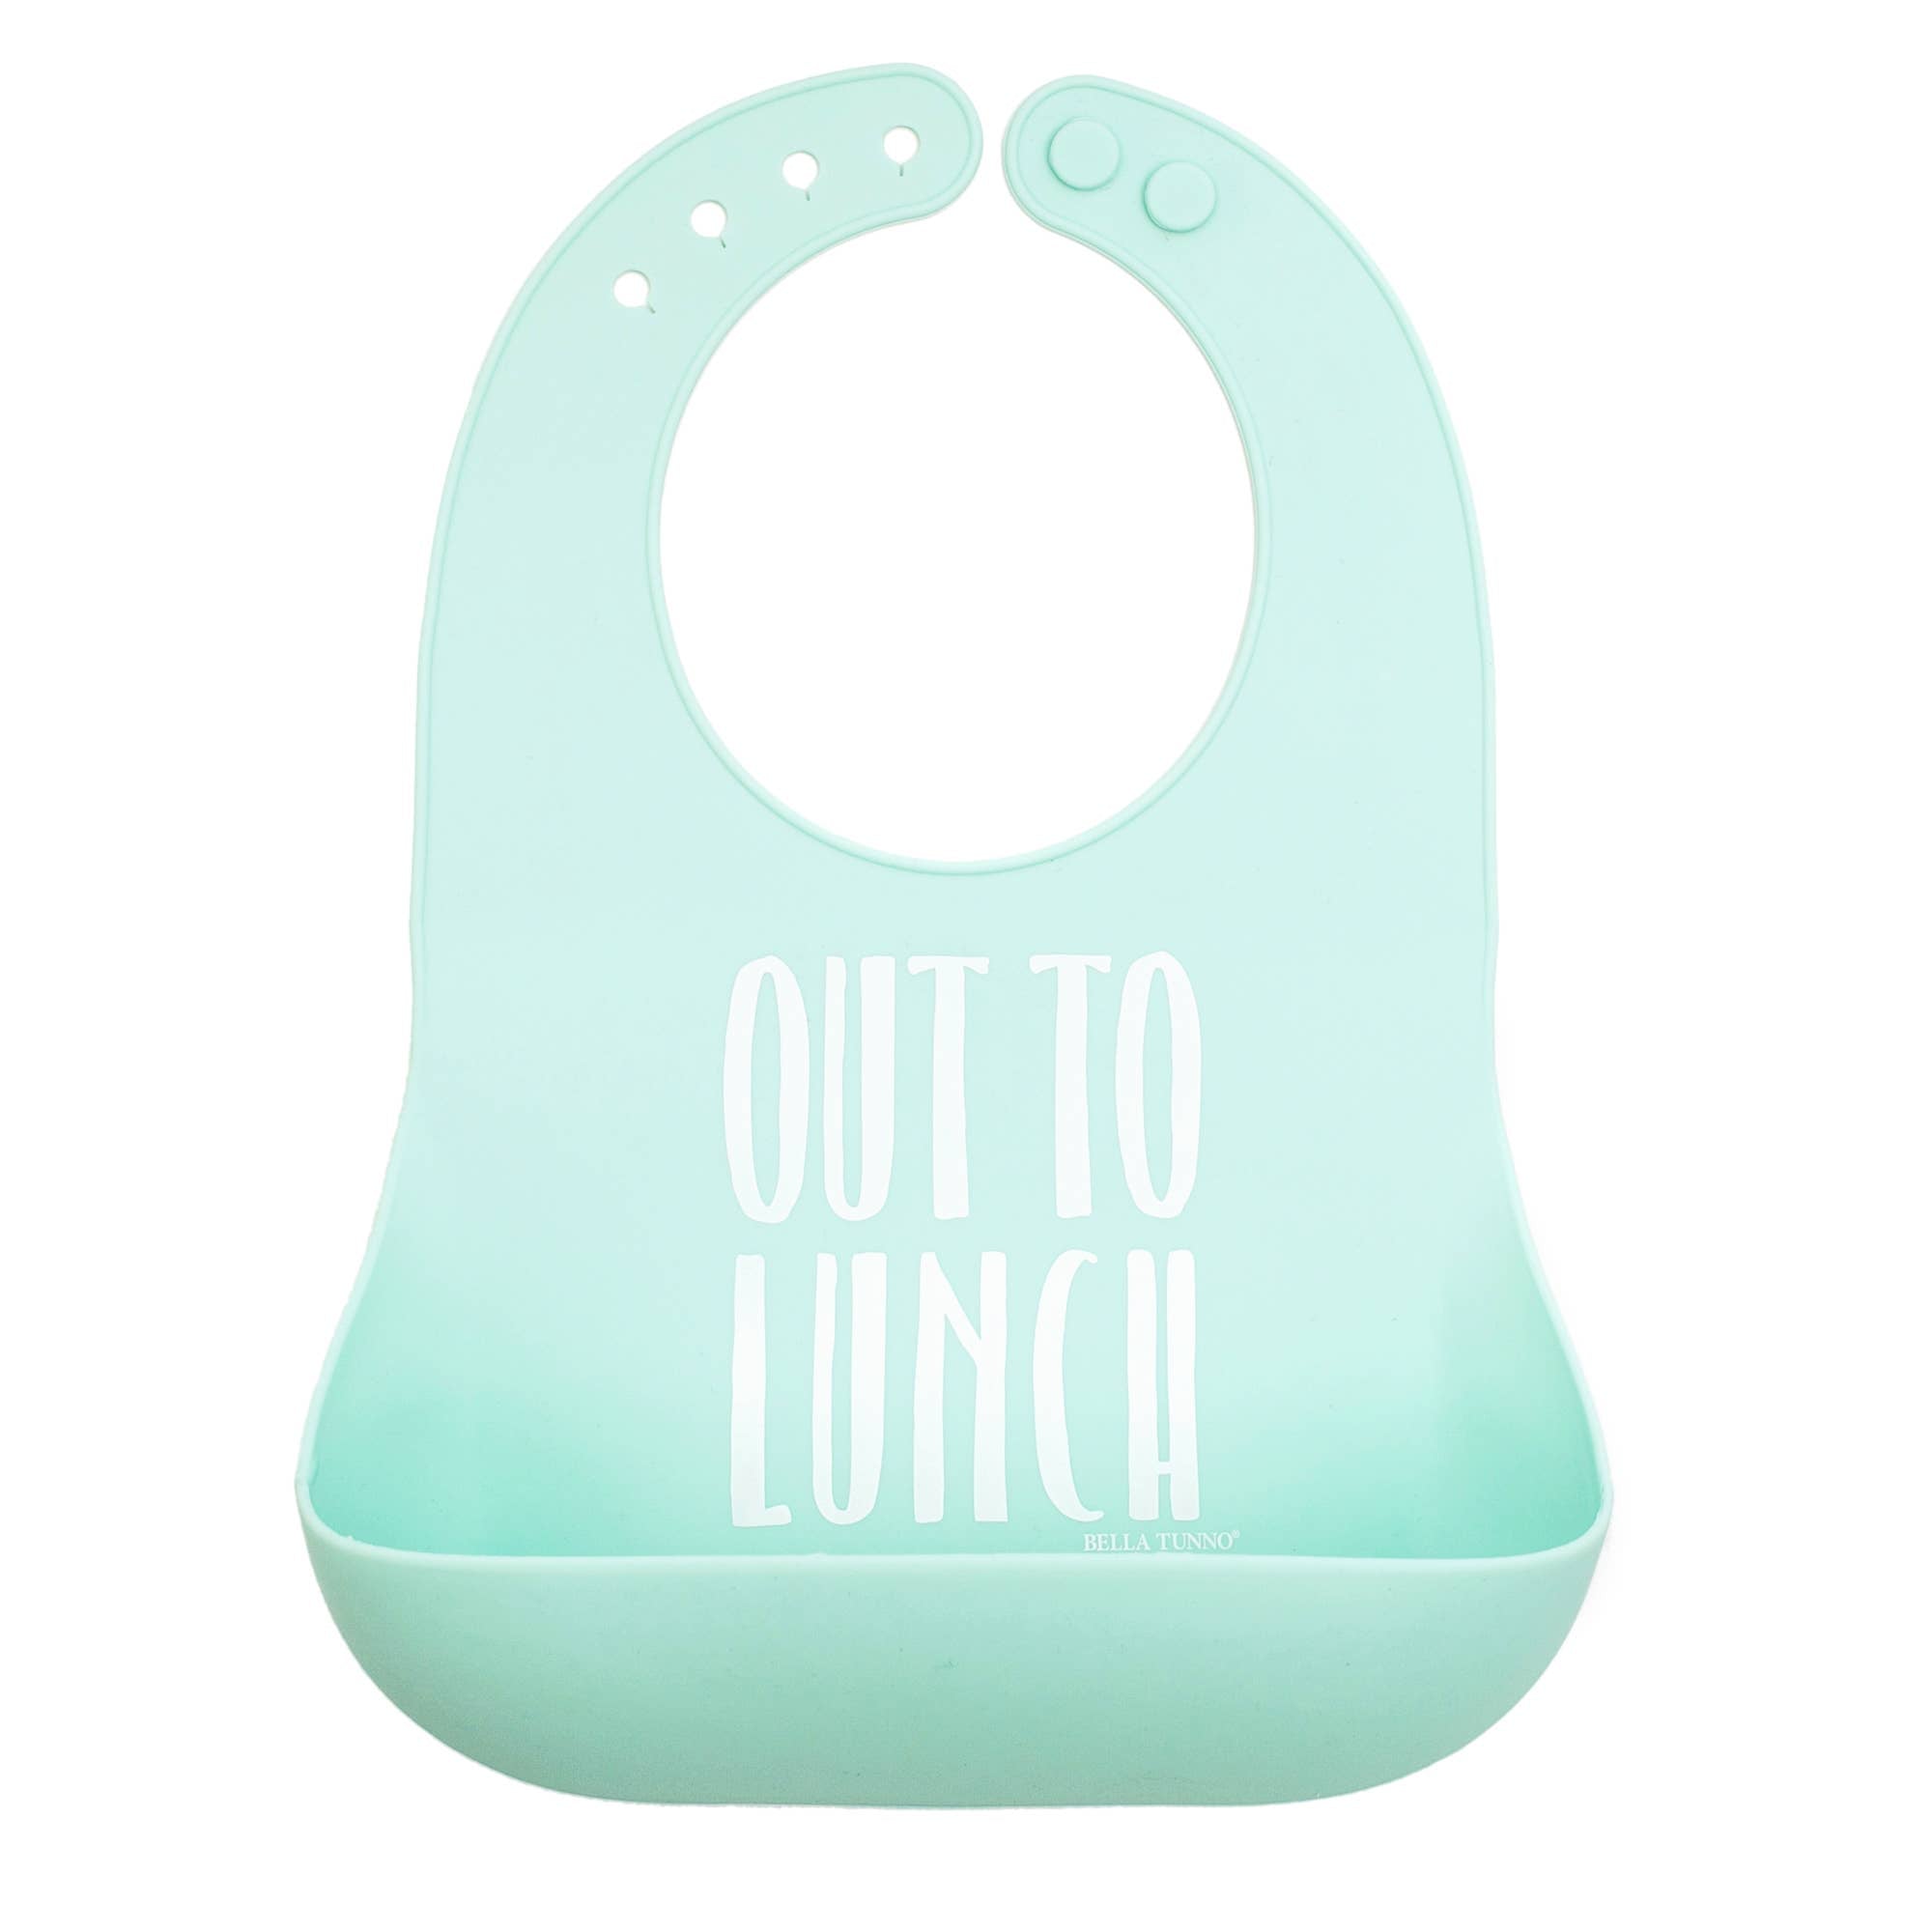 Wonder Bib - Out to Lunch - Crunch Natural Parenting is where to buy